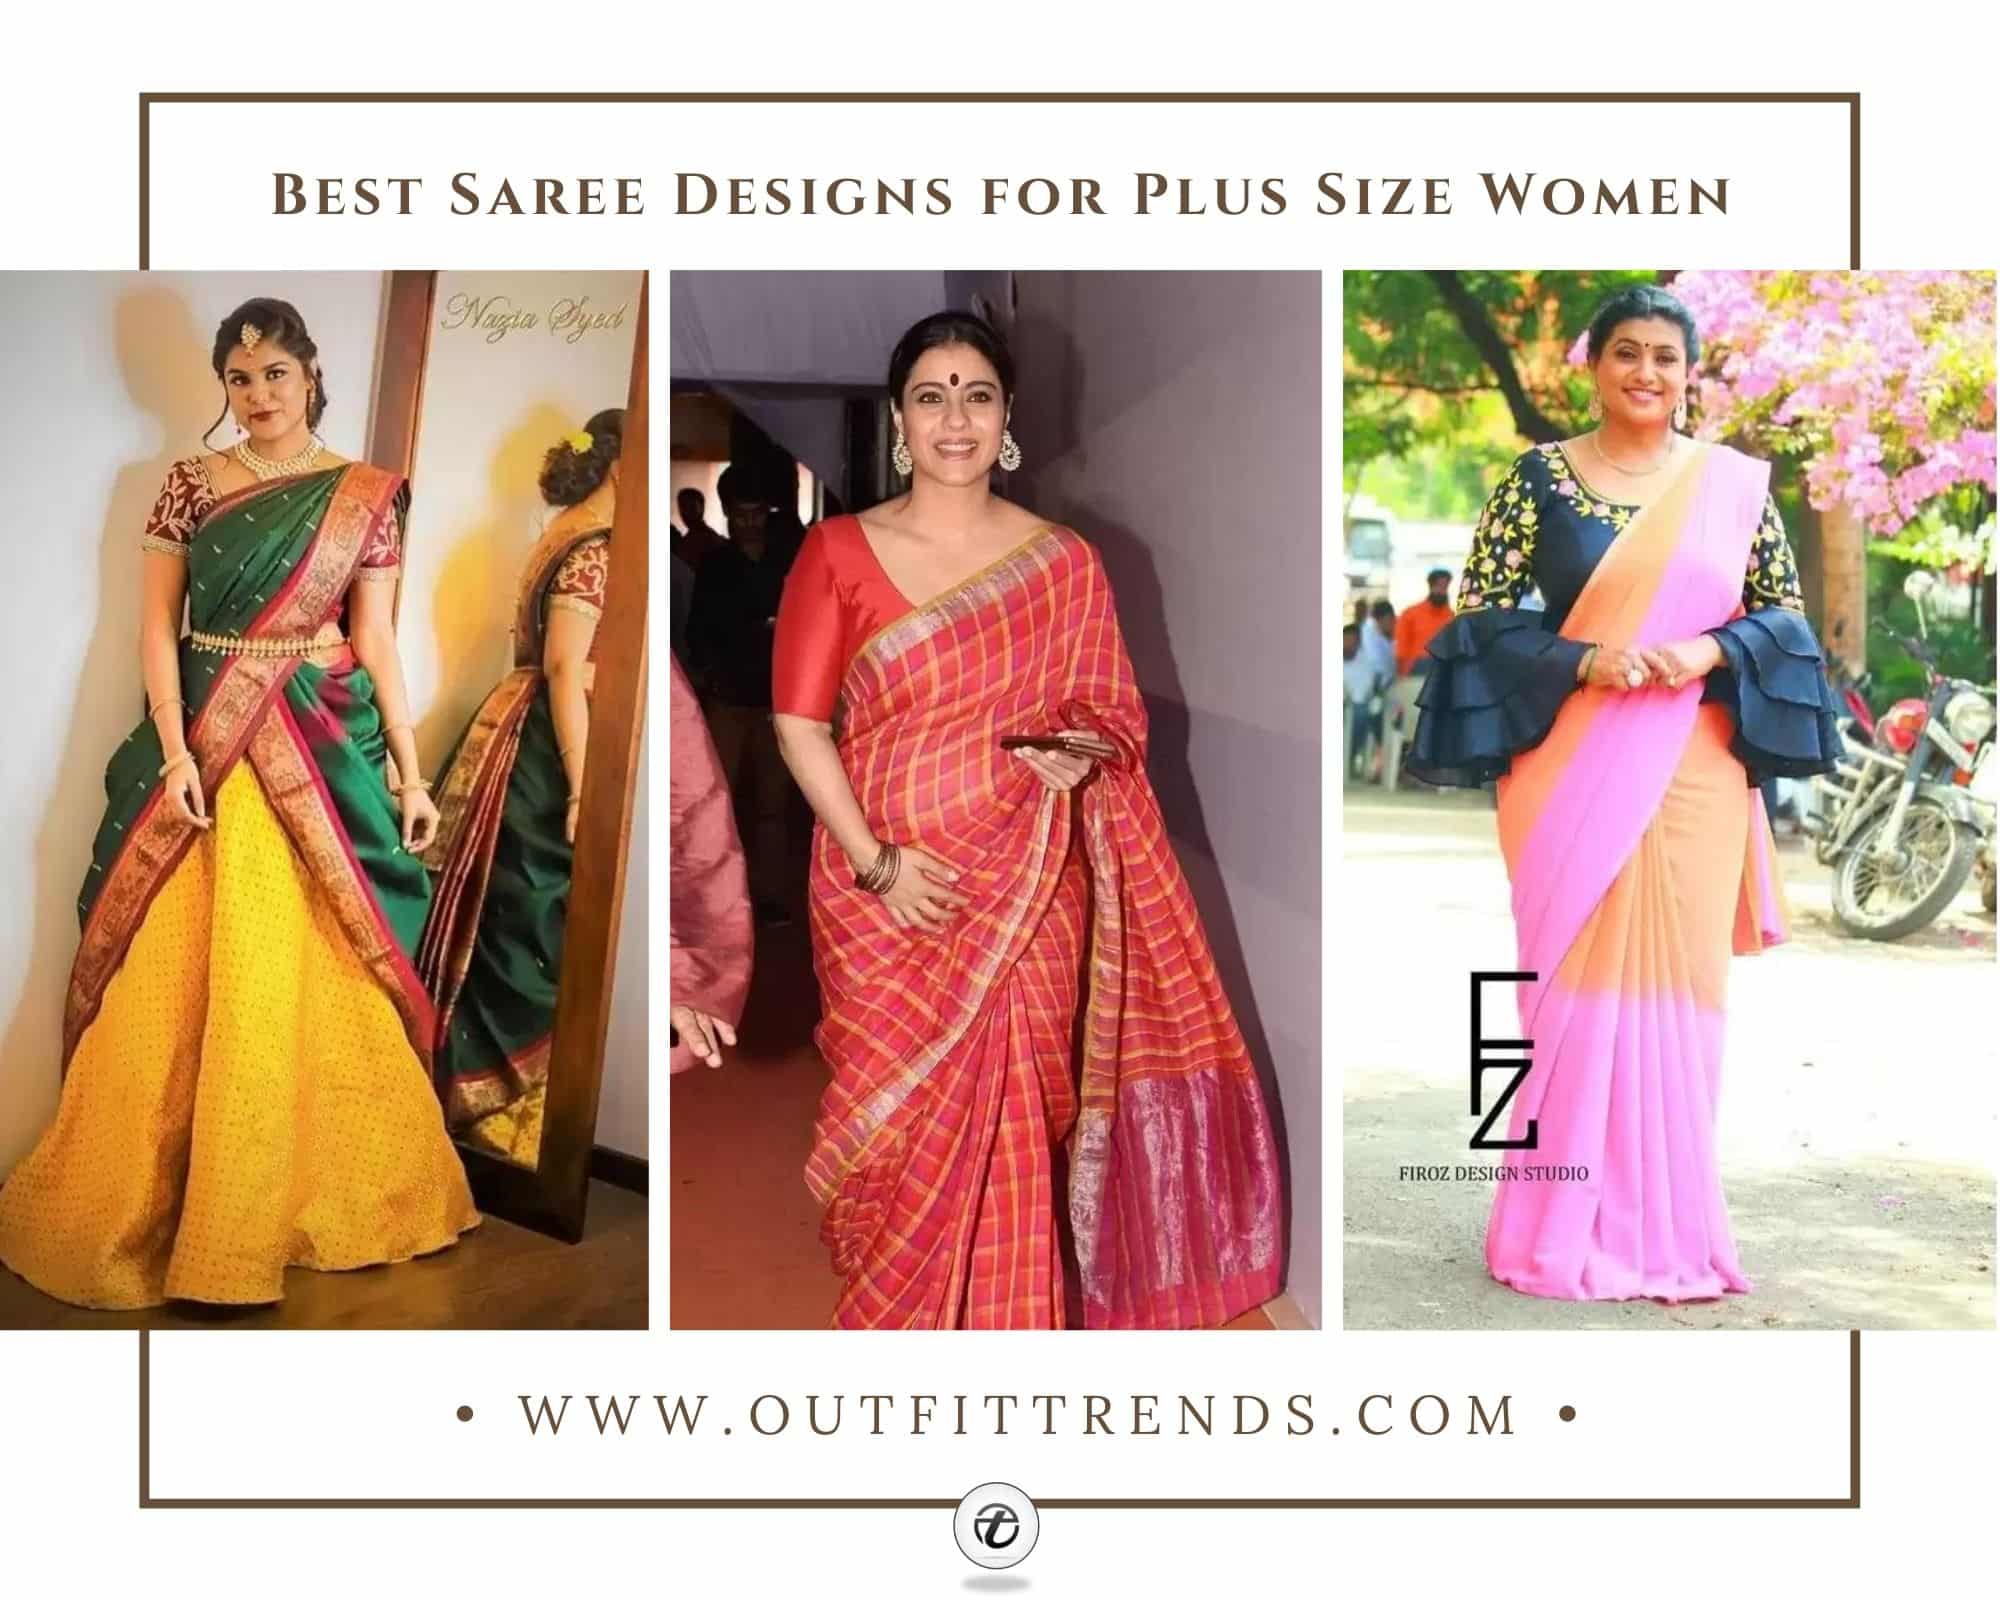 Top 10 Best Saree Bloggers to Follow on Instagram for Latest Saree Ideas